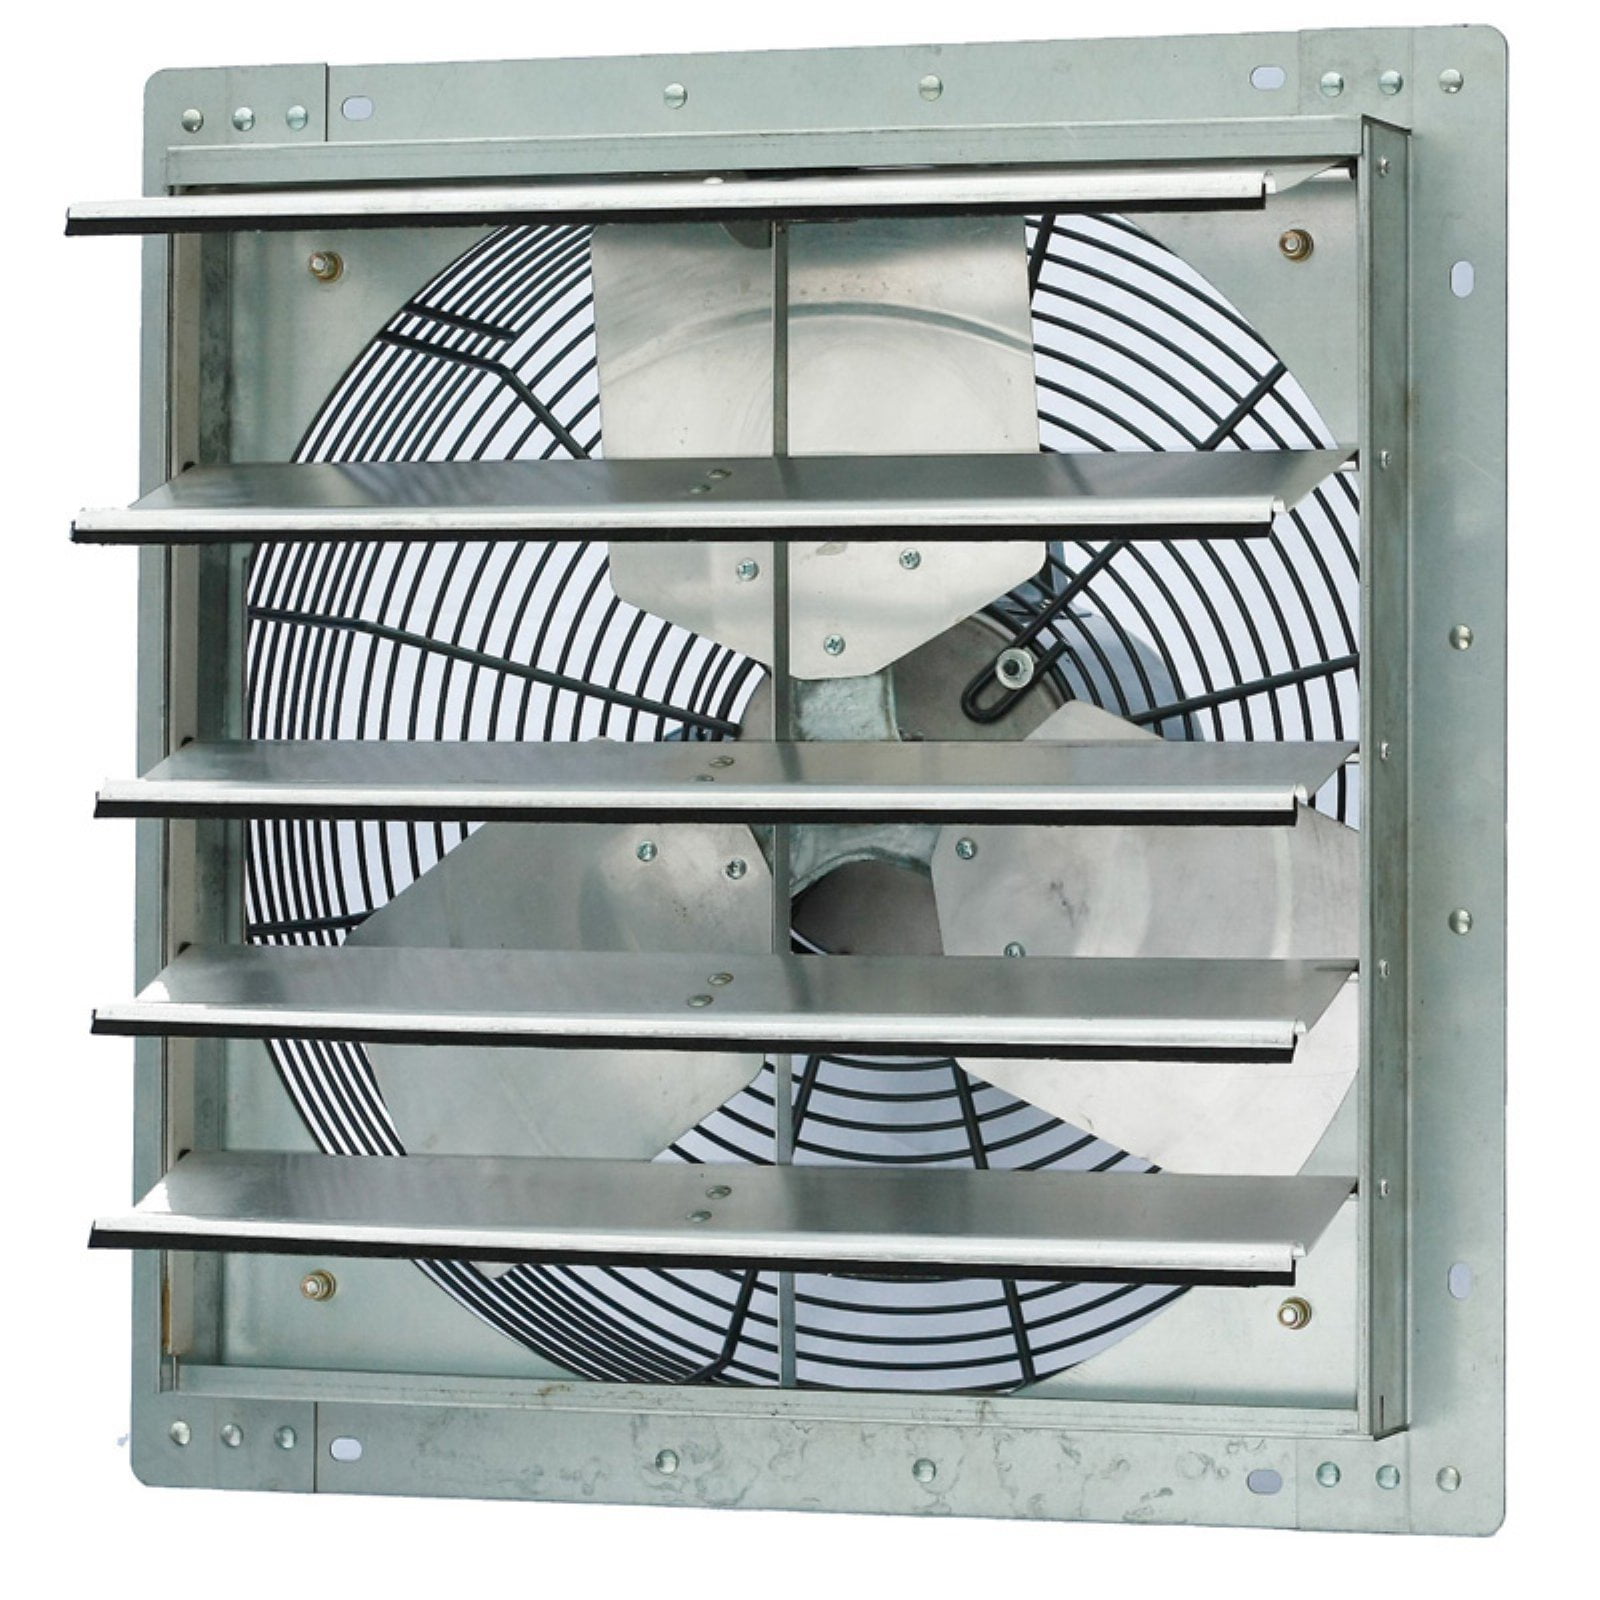 Details about   GRELWT 20 Inch Wall Mounted Steel Shutter Exhaust Fan Automatic Shutter 3877 CFM 